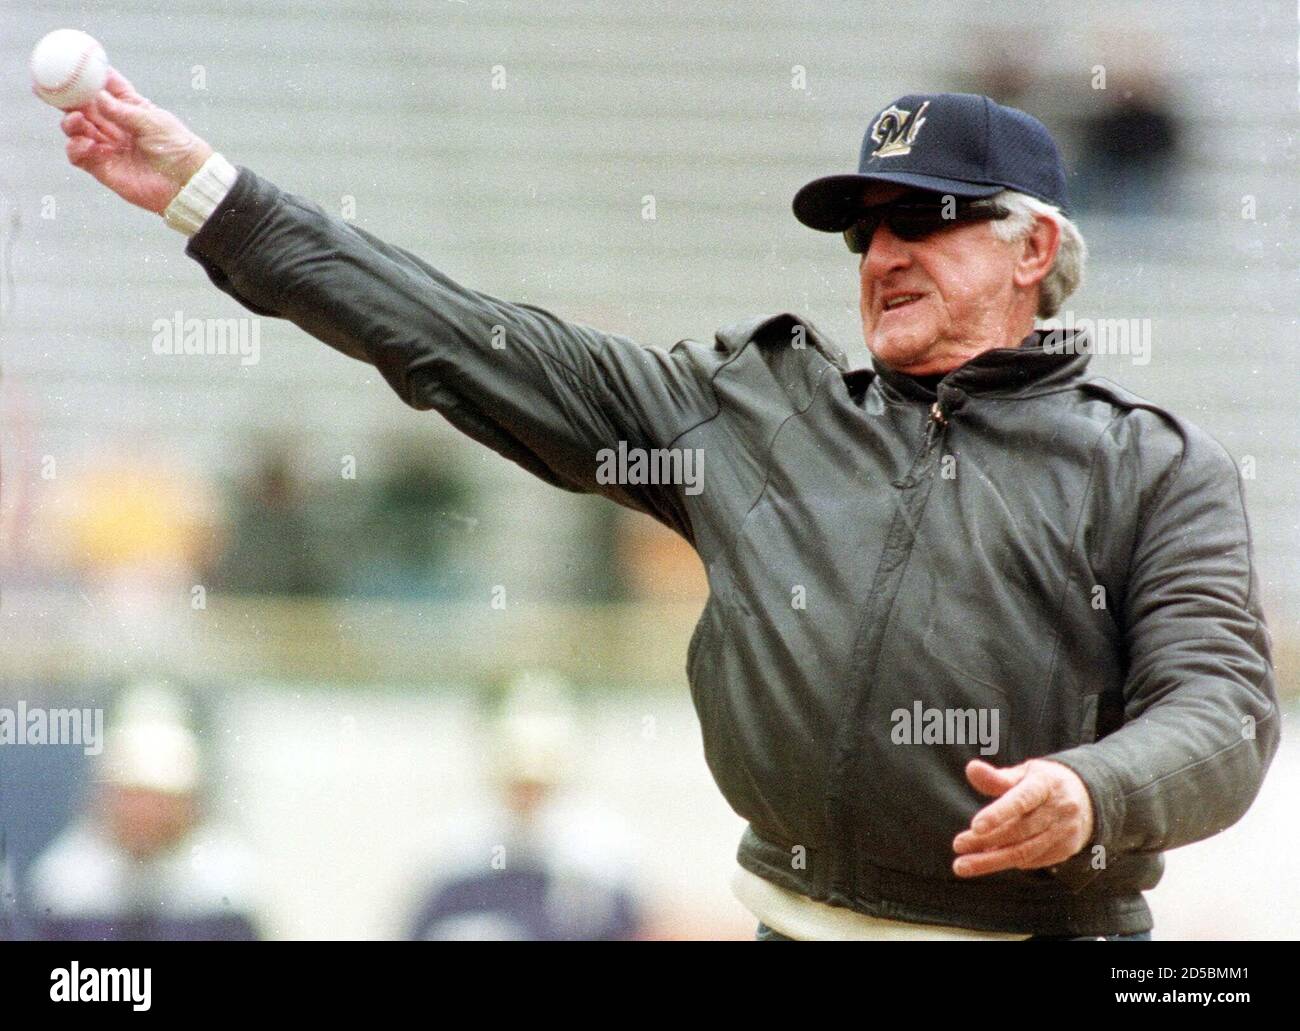 Radio broadcaster and former major league baseball player Bob Uecker throws  out the first pitch before the Milwaukee Brewers home opener against the  Florida Marlins at County Stadium in Milwaukee April 10.